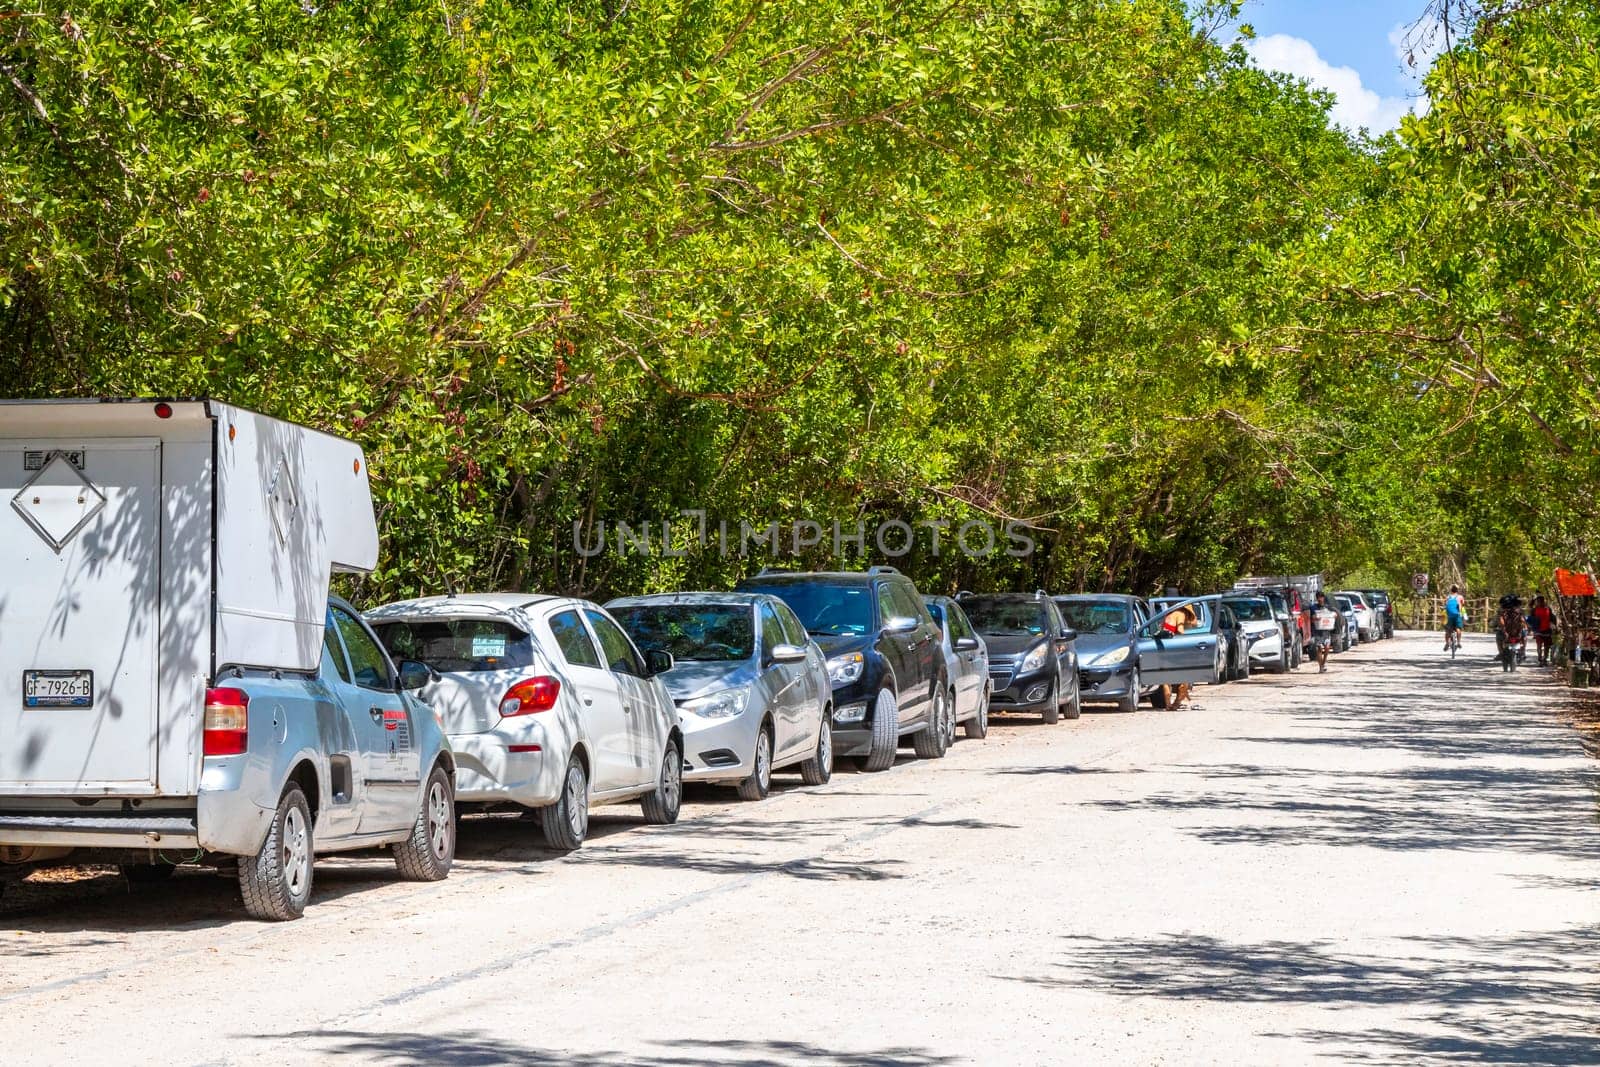 Various cars parked outside on the roadside in Playa del Carmen Quintana Roo Mexico.